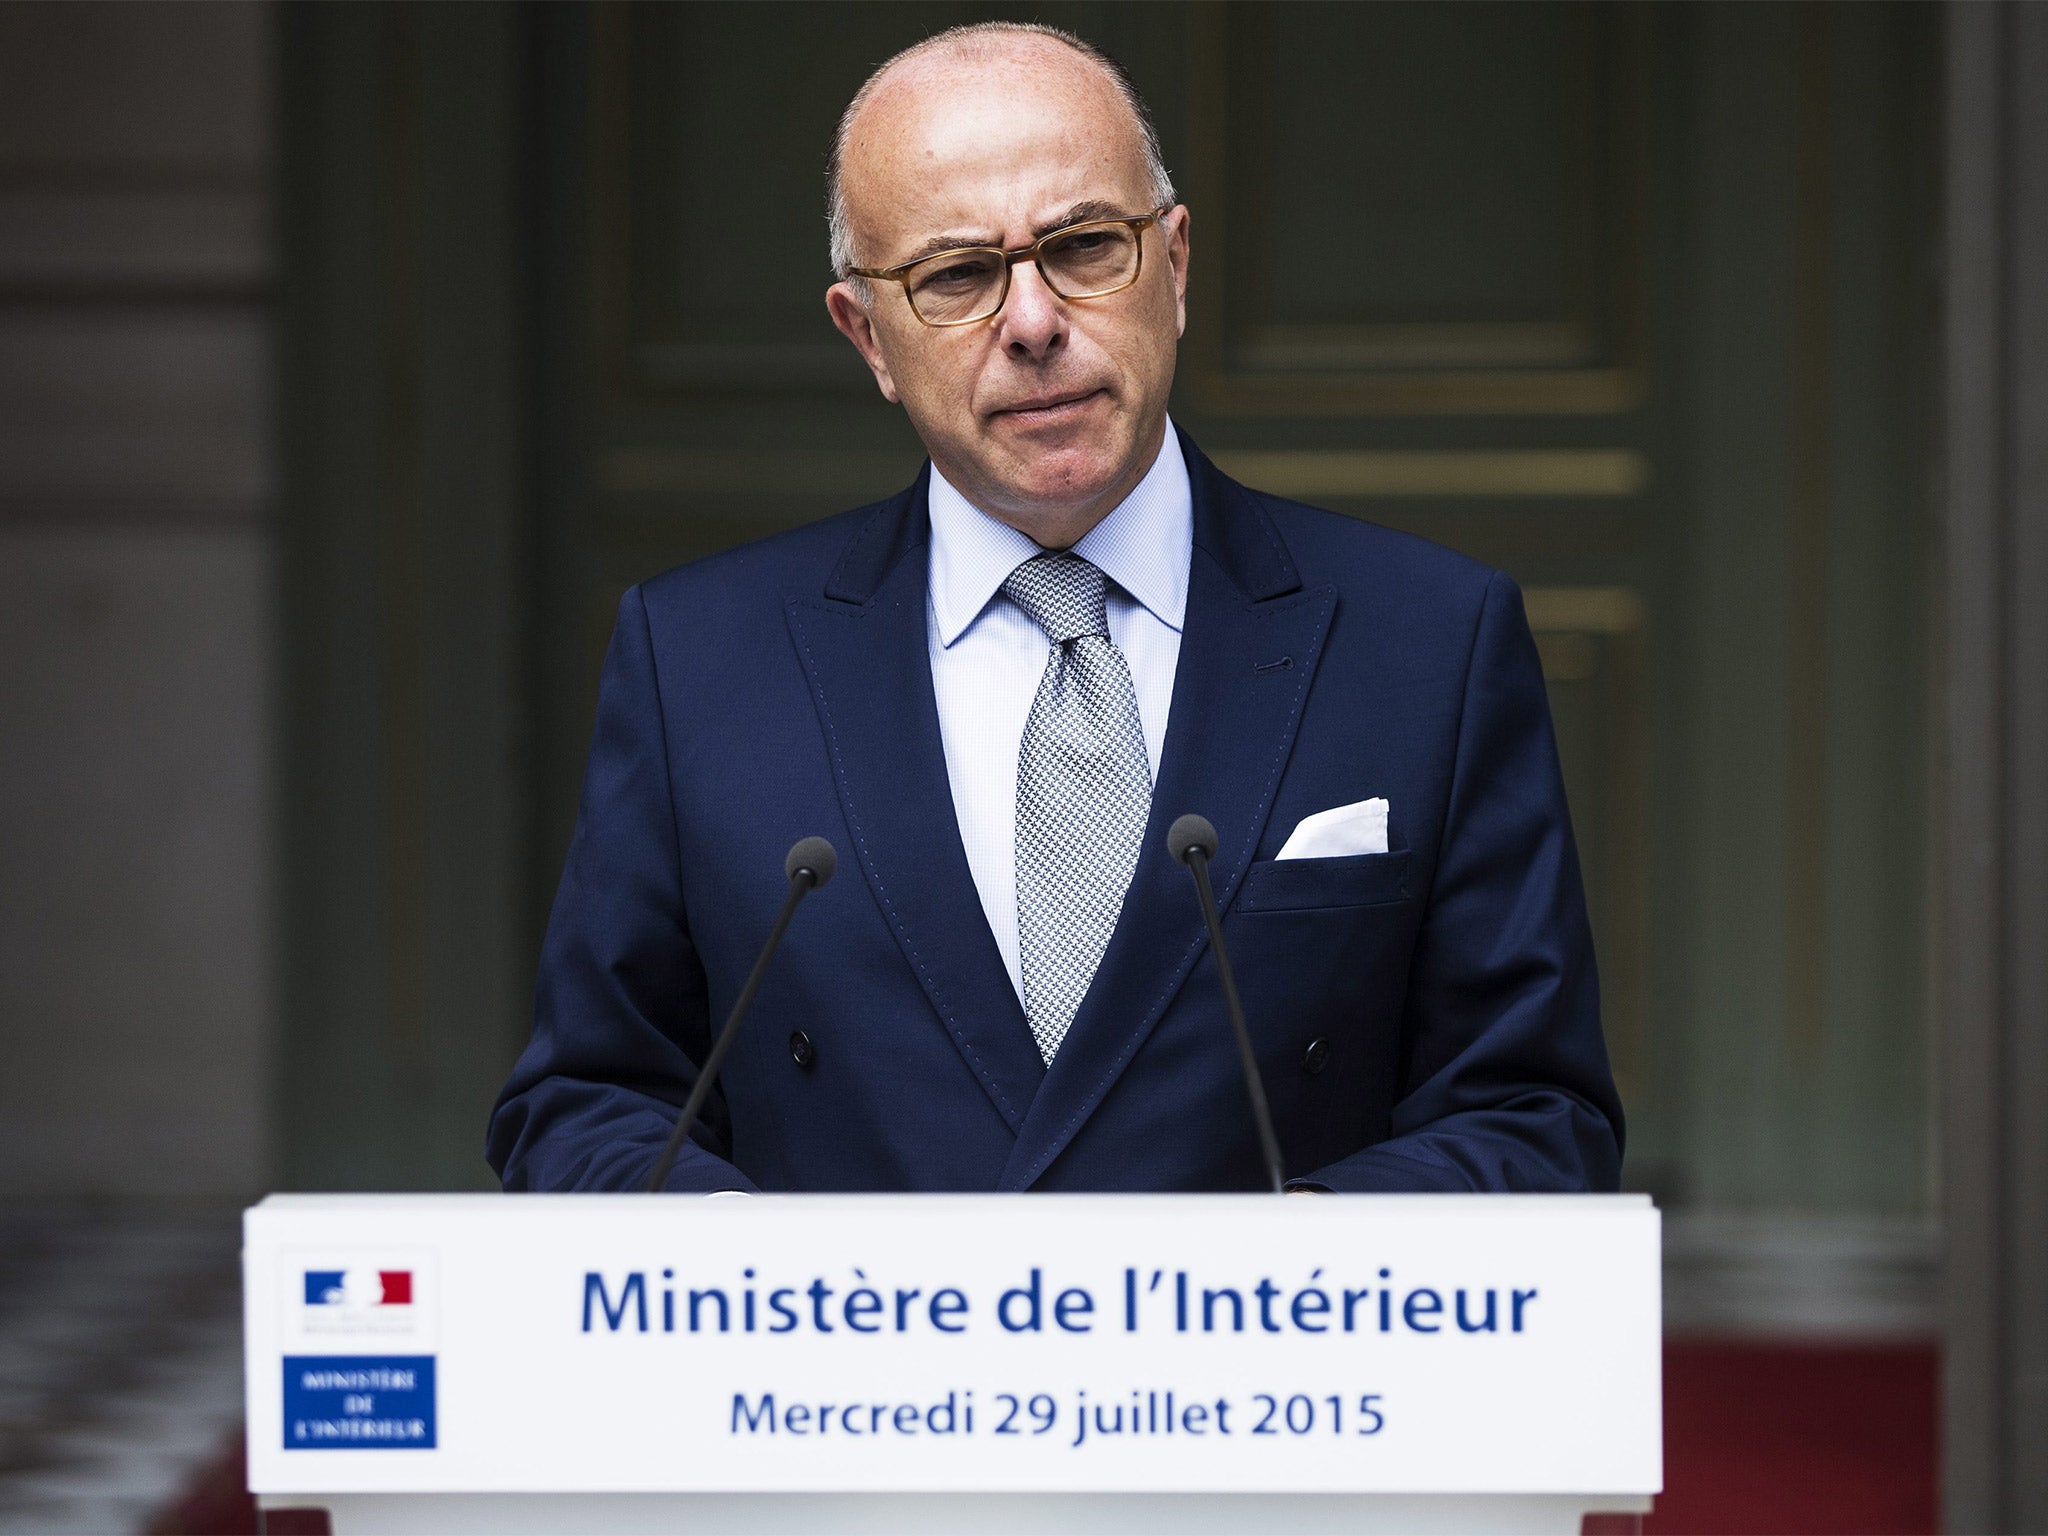 Bernard Cazeneuve said it is the first time mosques have been closed ‘on grounds of radicalisation’ 